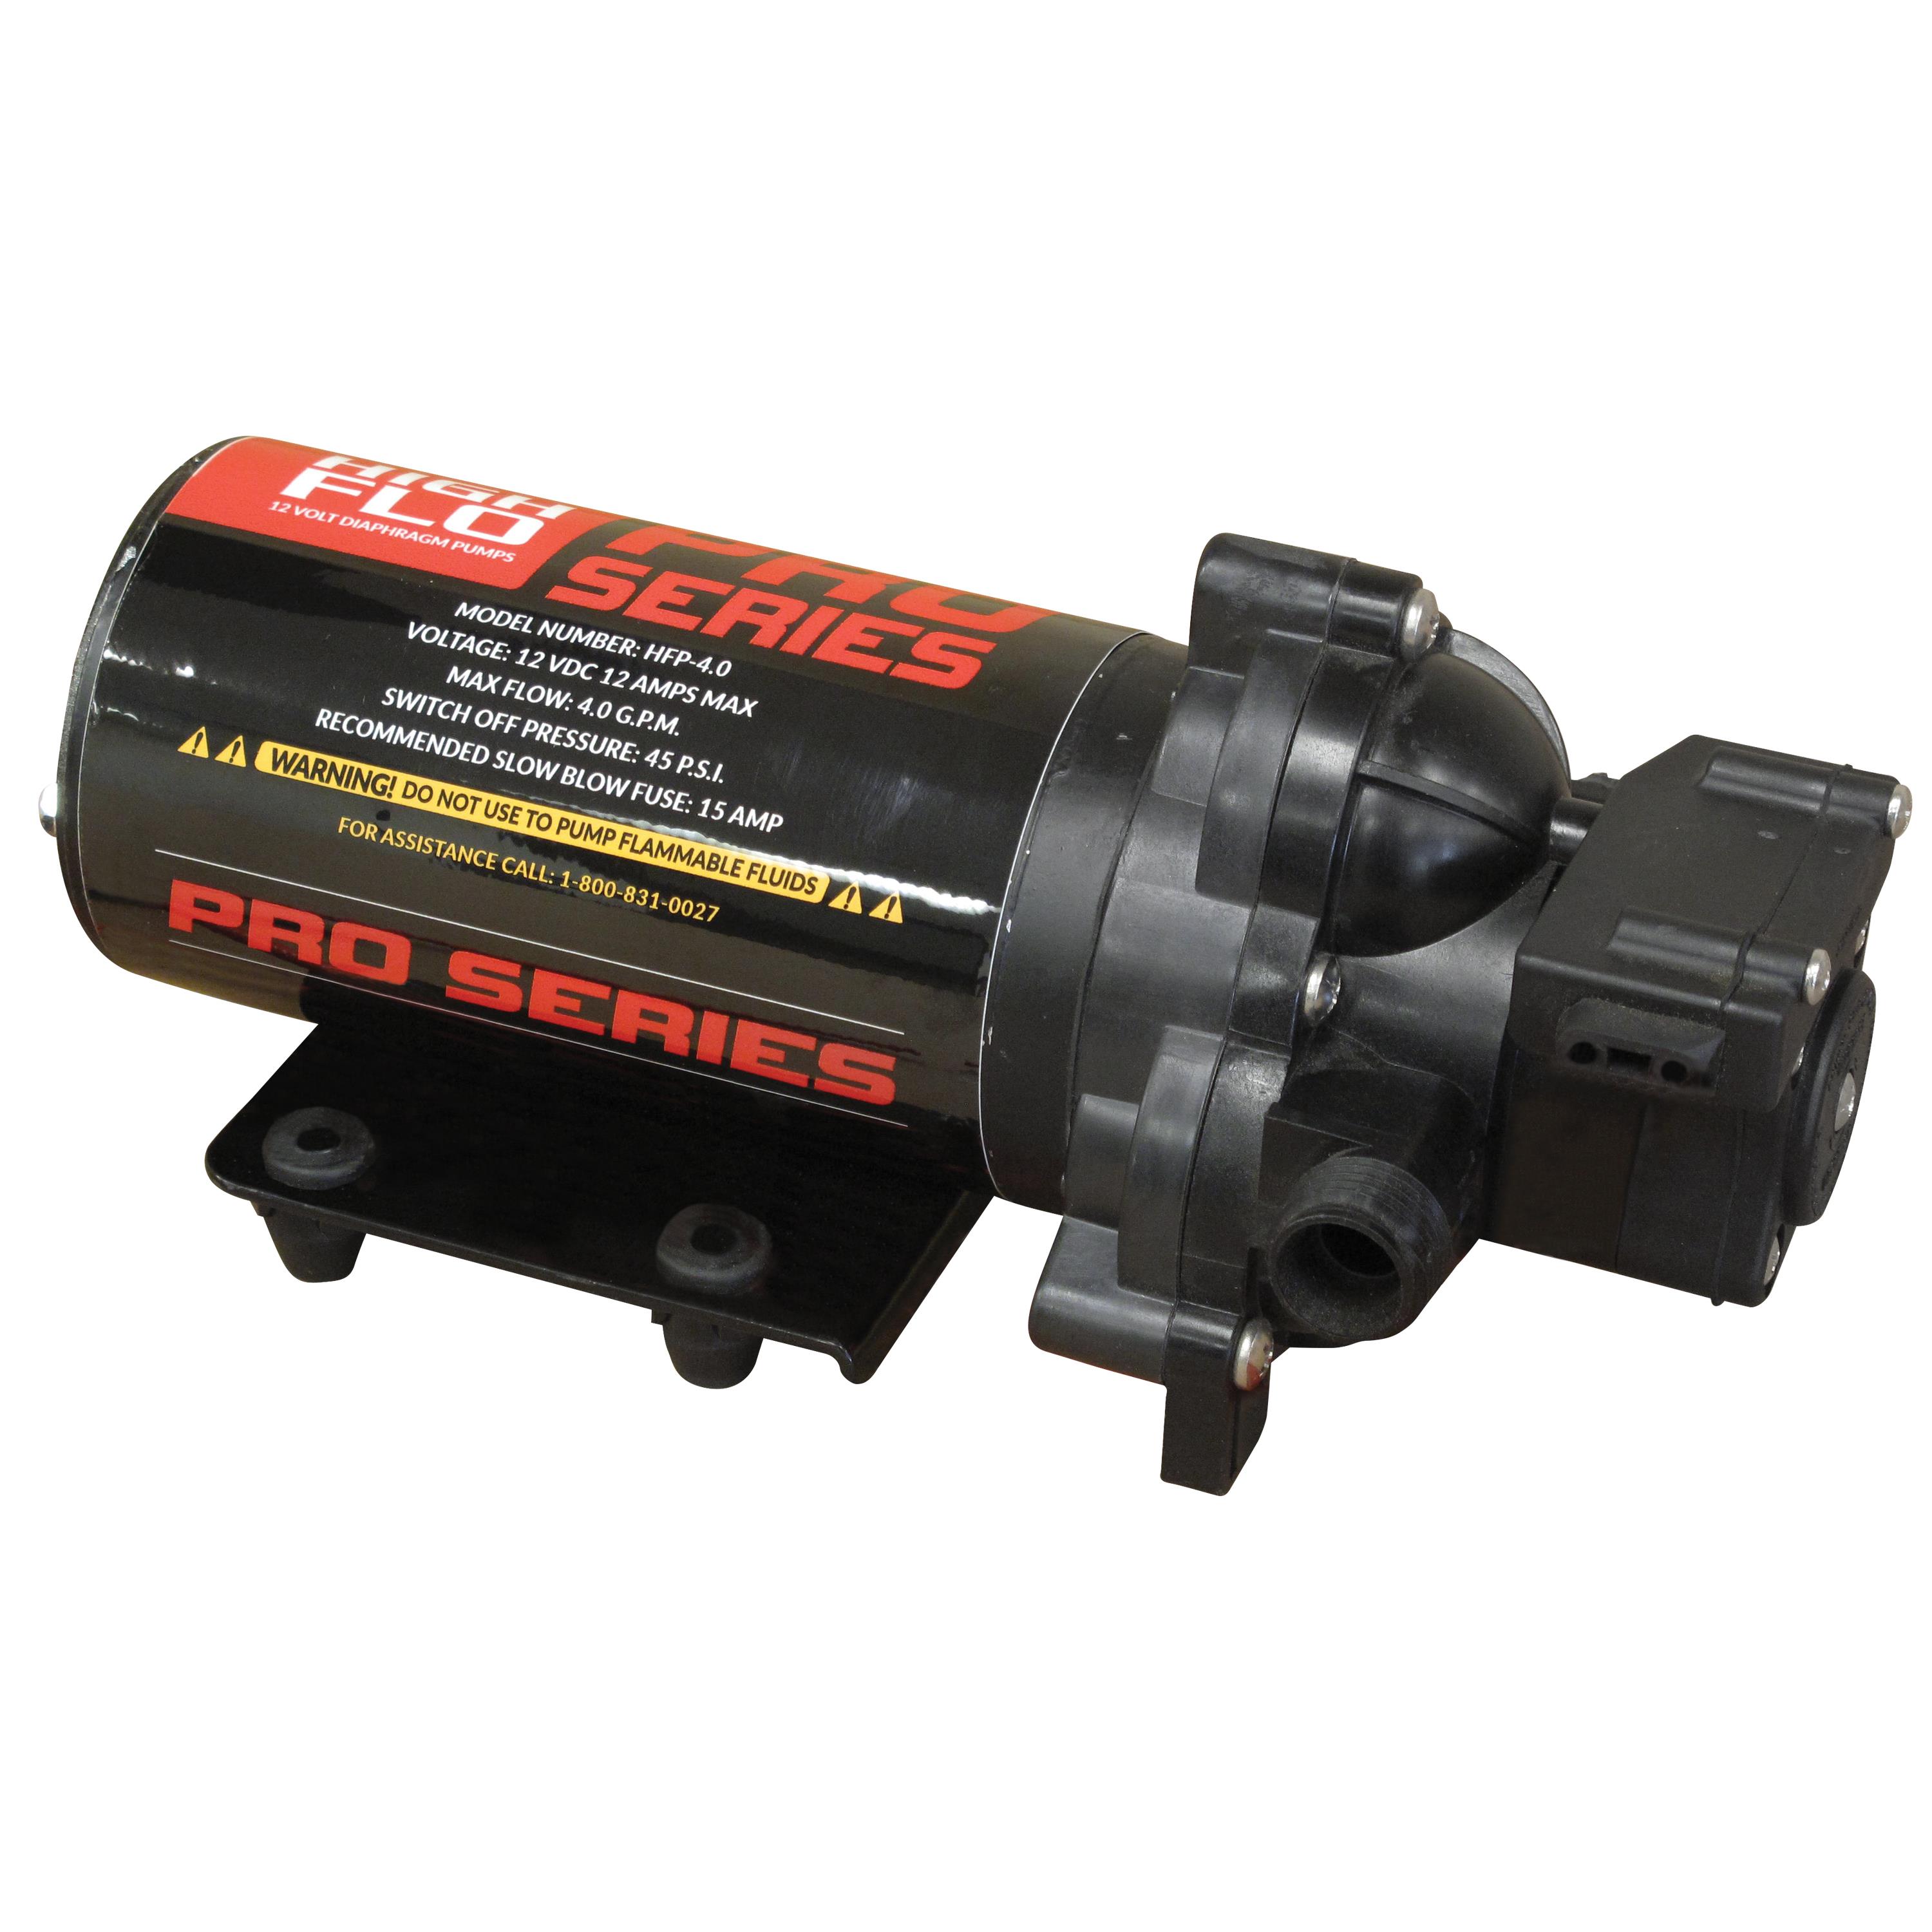 High-Flo High Performance Pump 4.5 GPM 60 PSI 5151088 for sale online 